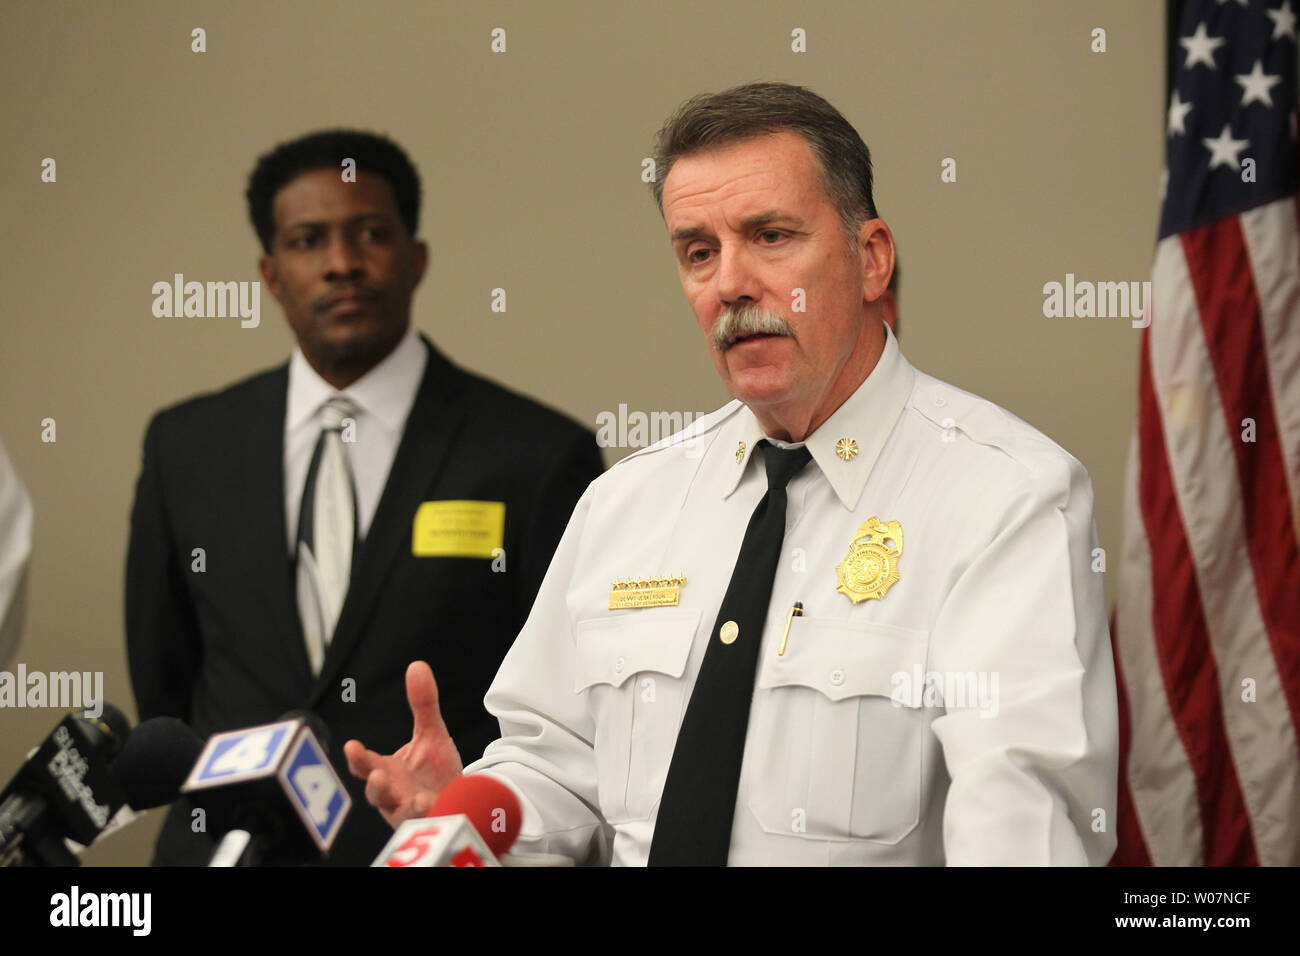 St. Louis Fire Chief Dennis Jenkerson comments on the arrest of a suspect who set fire to two churches in St. Louis on October 30, 2015. St. Louis Police say thay have arrested David Lopez Jackson for setting two of the seven suspious fires at St. Louis are churches. Based on the investigation so far, police say there is no indication of a hate crime or sign of any particular Christian denomination or ethnic group being targeted. Pastor David Triggs of the New Life Missionary Baptist Church, whose church sustained major damage, stands near. Photo by Bill Greenblatt/UPI Stock Photo